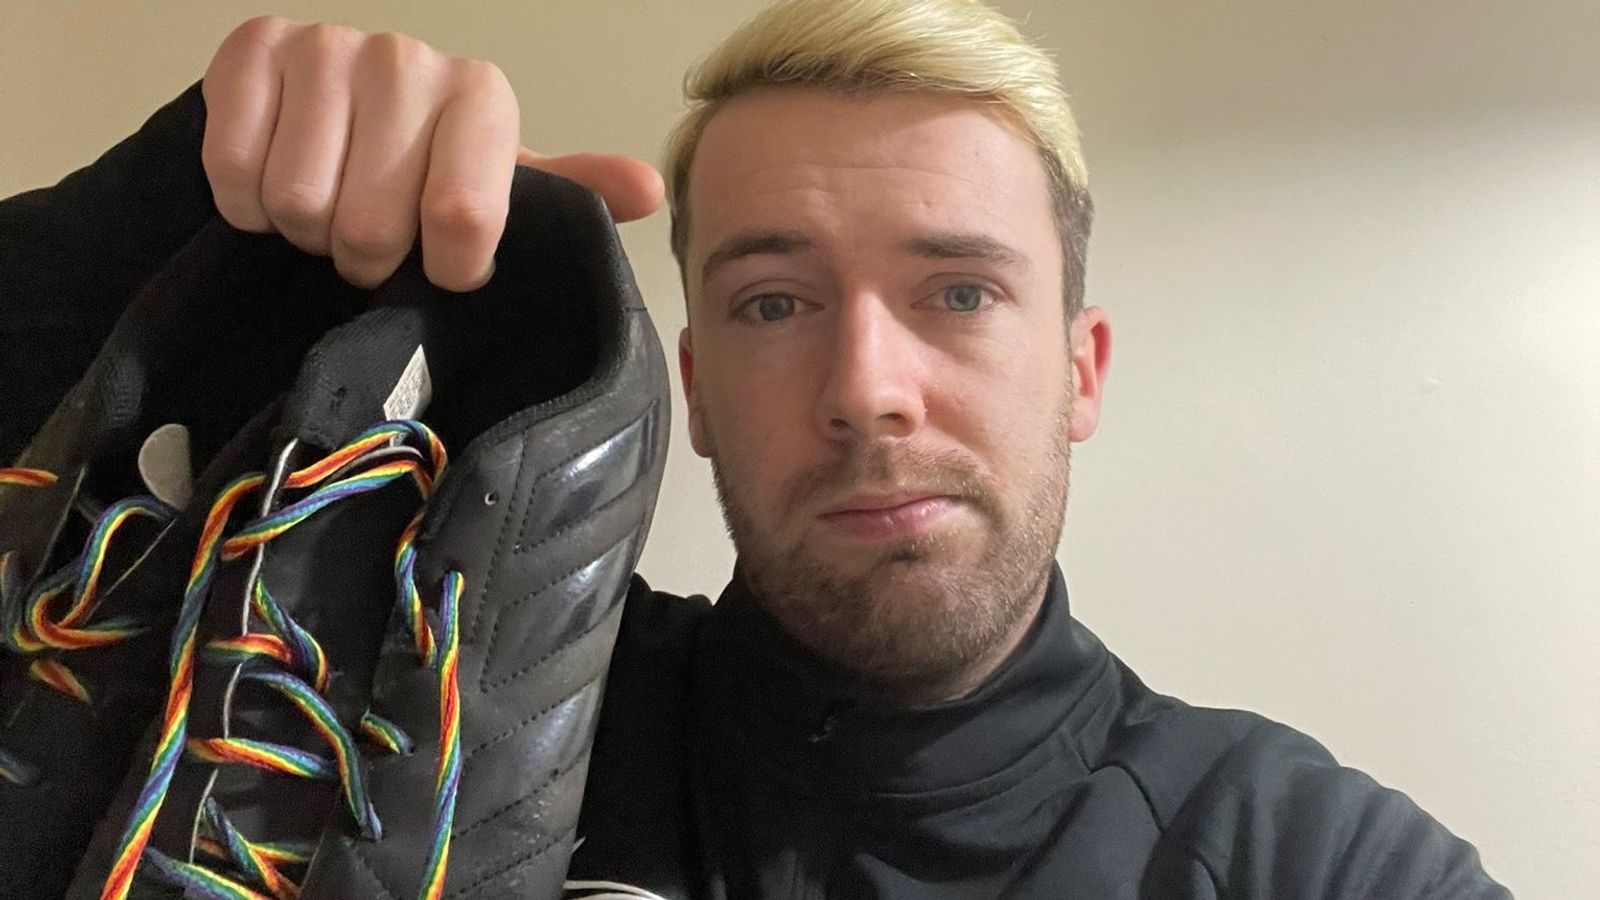 Rainbow Laces: Ashby United holding campaign charity game after incident in which player endured 'torrent' of homophobic abuse